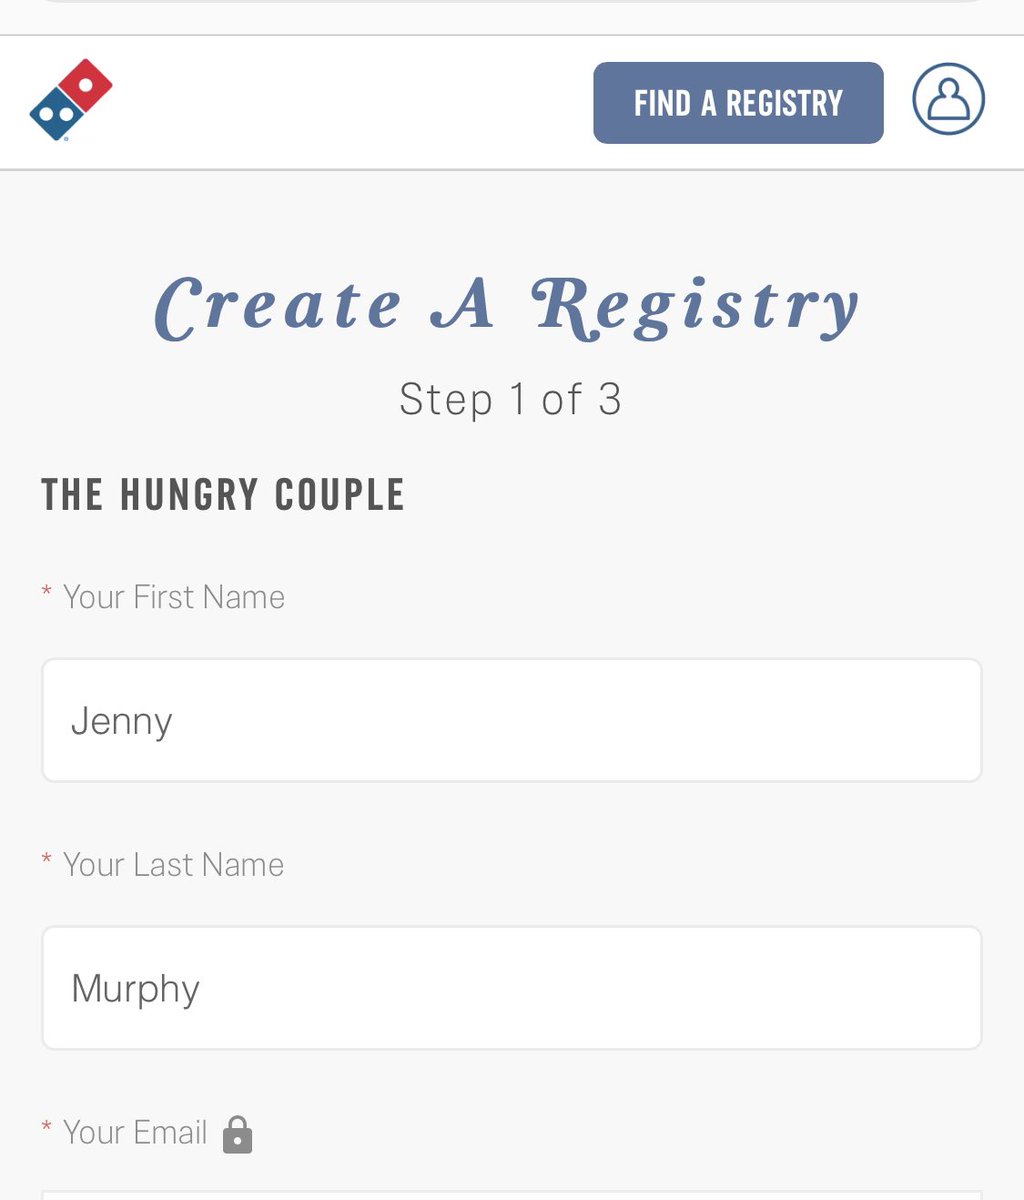 RT @GeorgiaShenk: Signing my friend Jenny up for a dominos pizza wedding registry https://t.co/zFquejiLEW